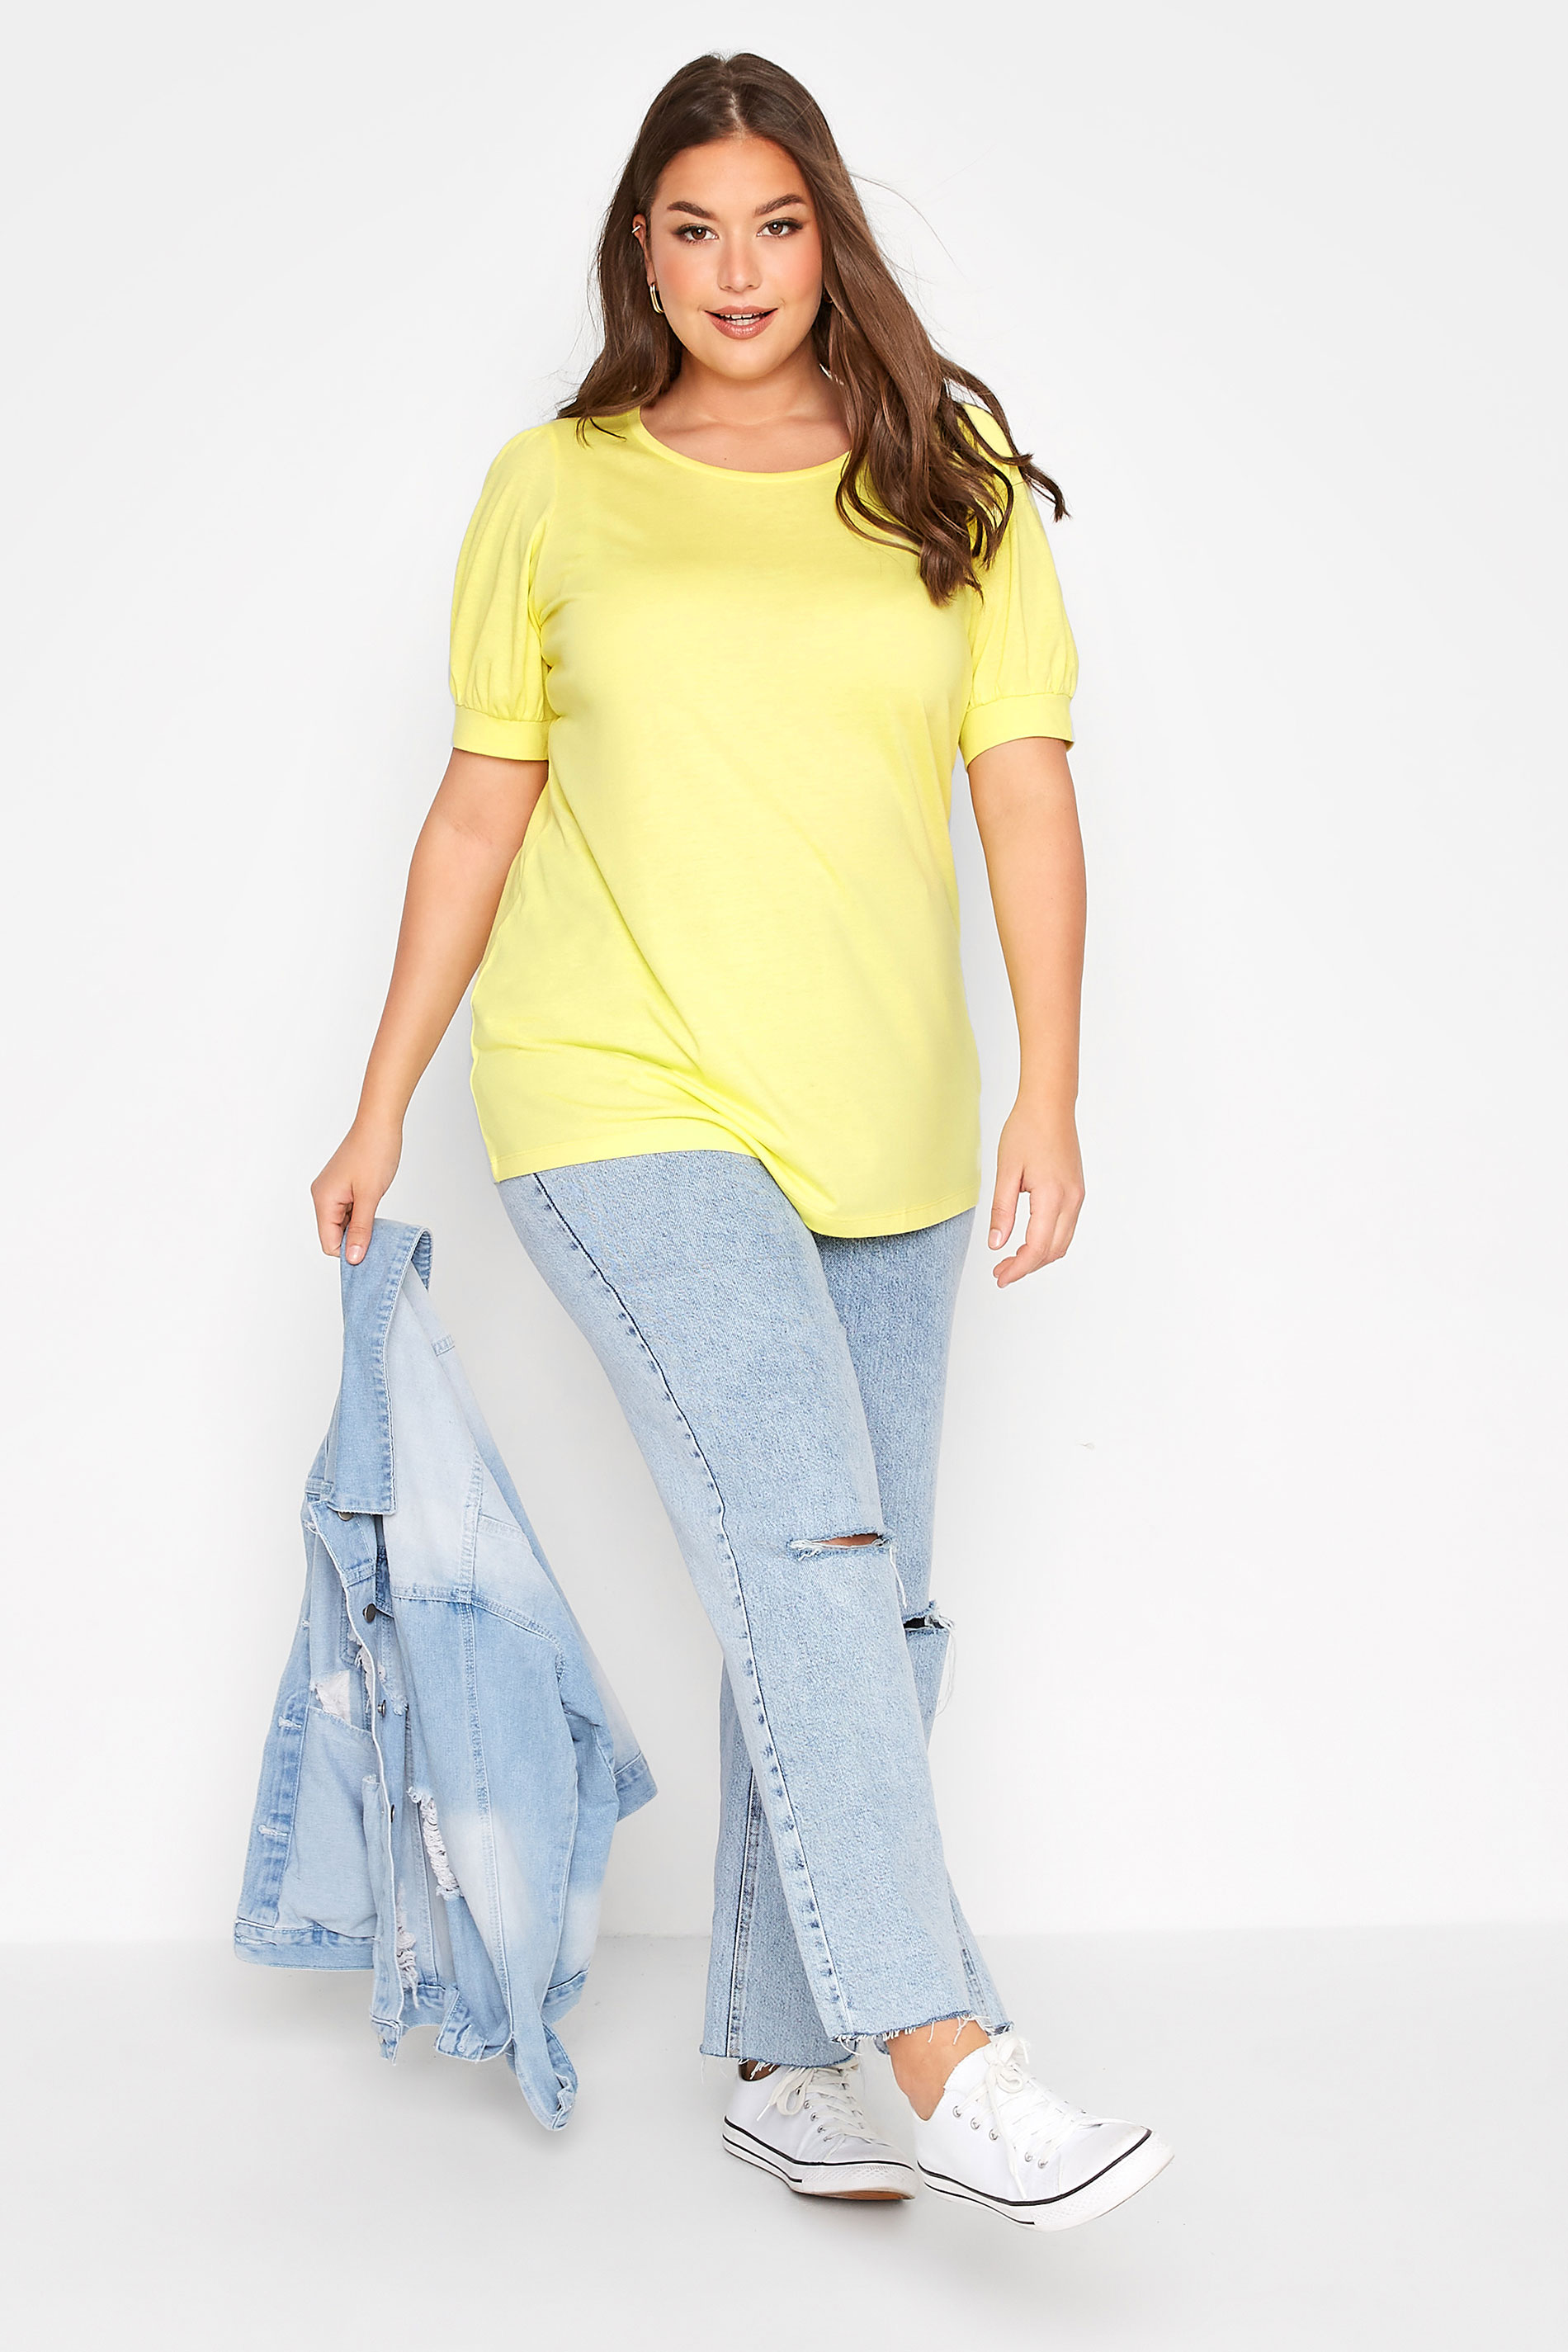 Grande taille  Tops Grande taille  T-Shirts | T-Shirt Jaune Manches Courtes Bouffantes - XV62687